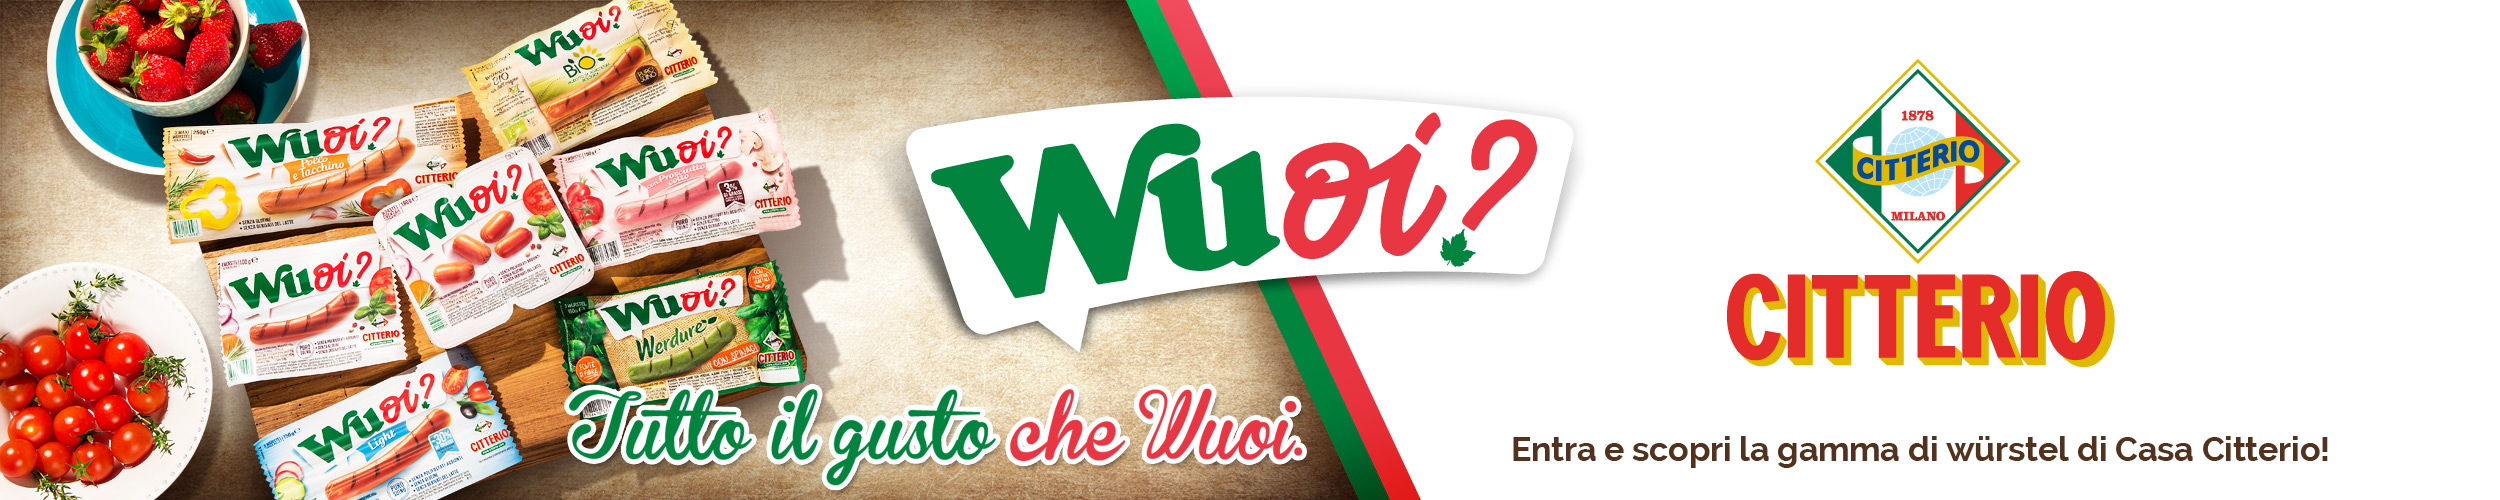 THE RELAUNCH OF “WUOI?” GOES NATIVE